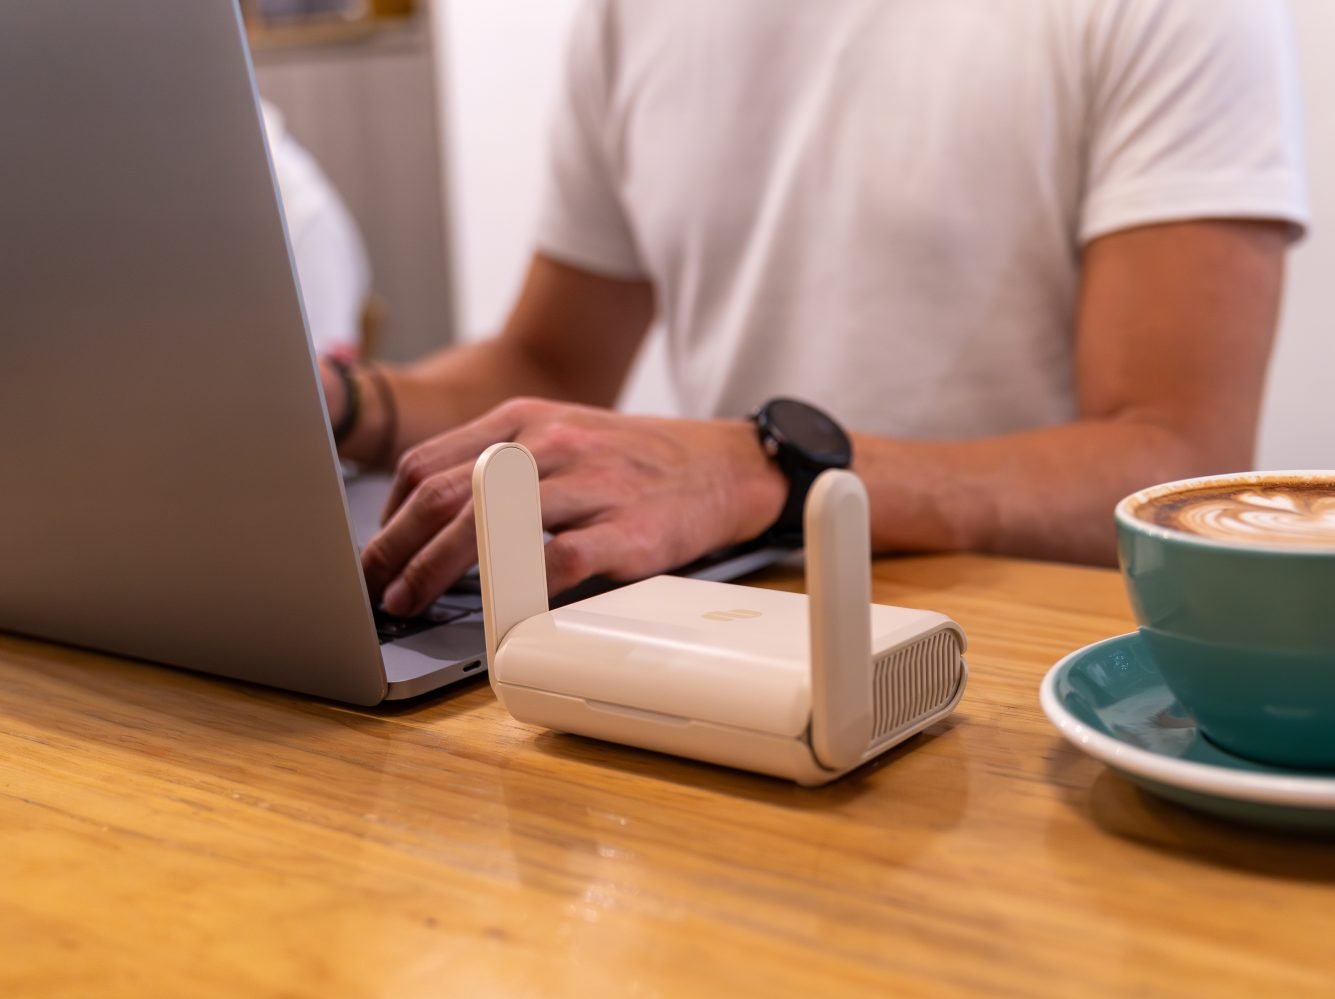 ExpressVPN launches first portable Wi-Fi router with built-in VPN